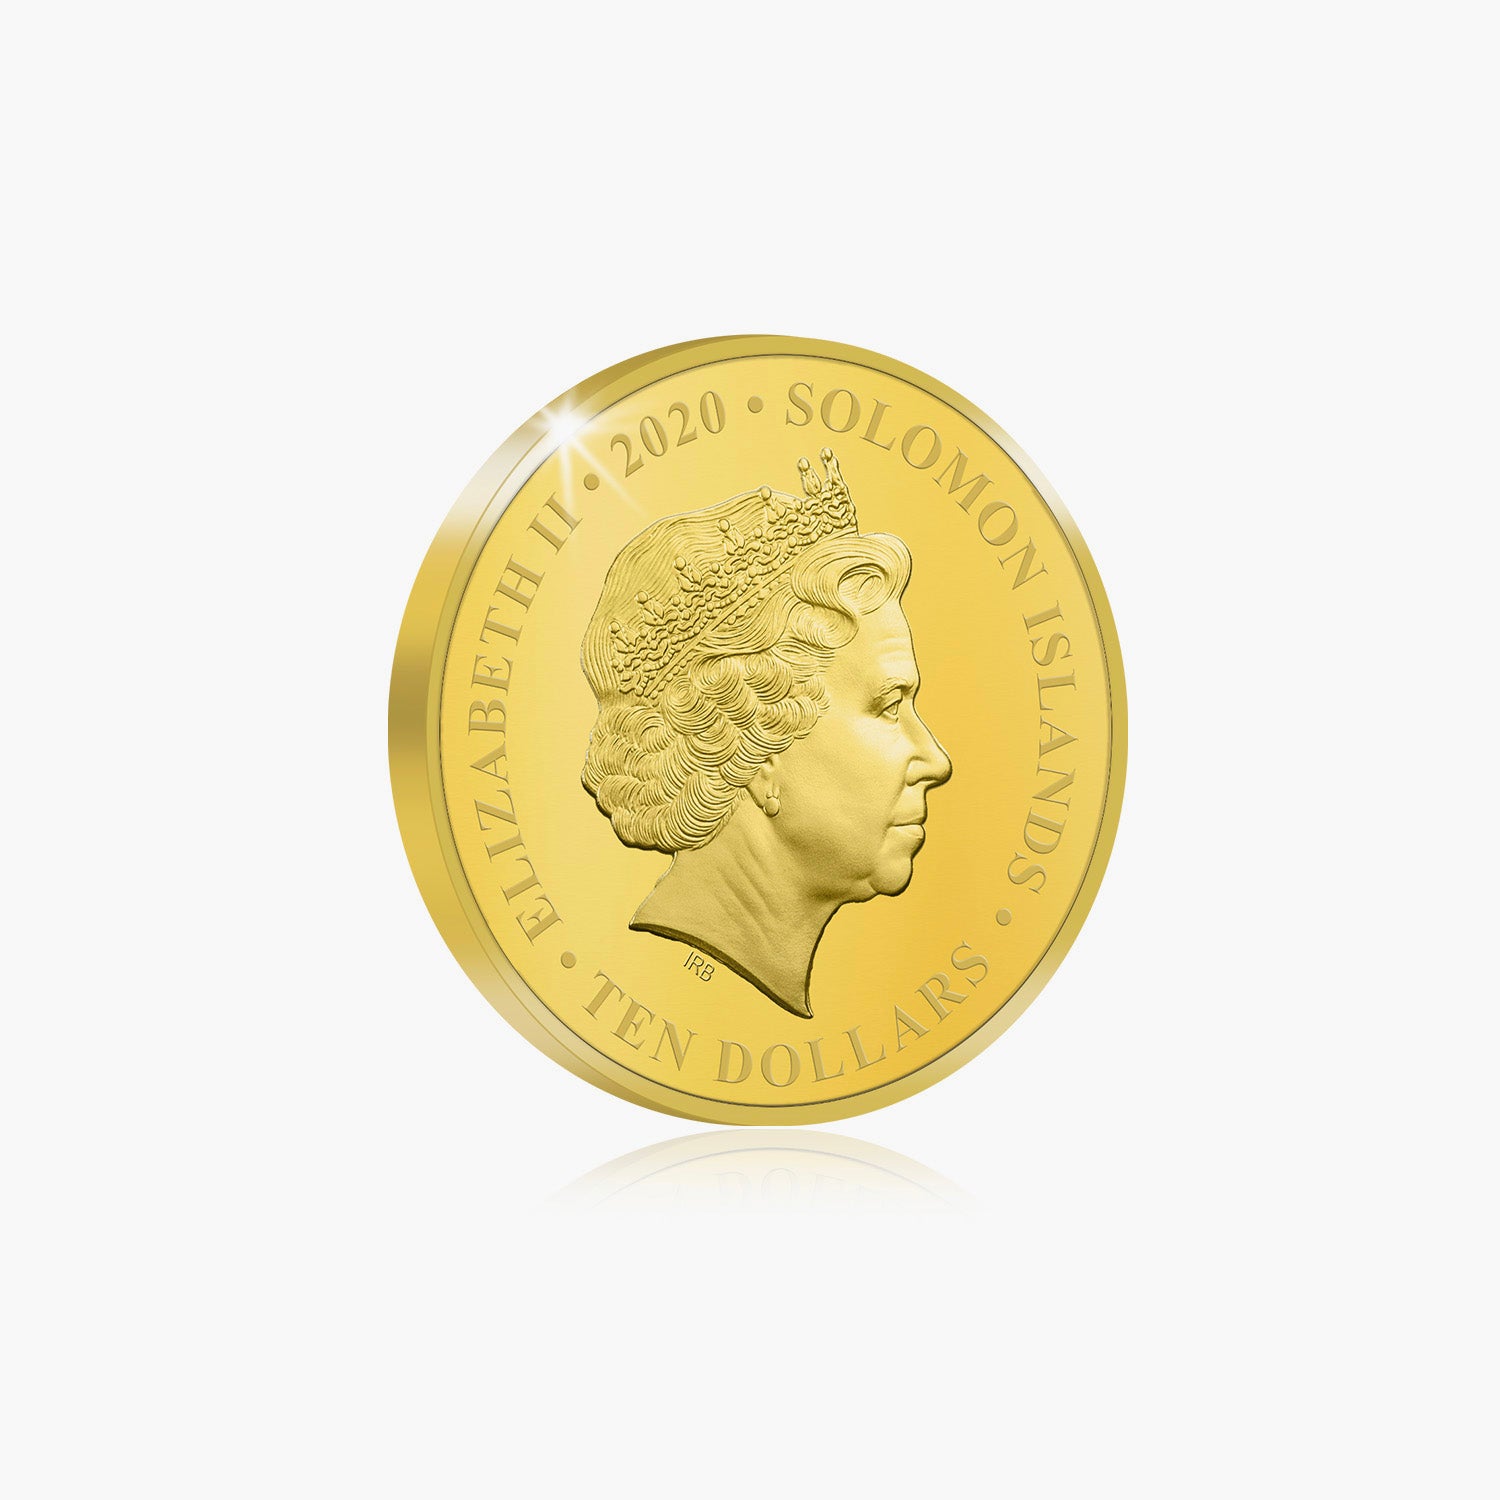 To Dear Old Blighty 11mm Gold Coin